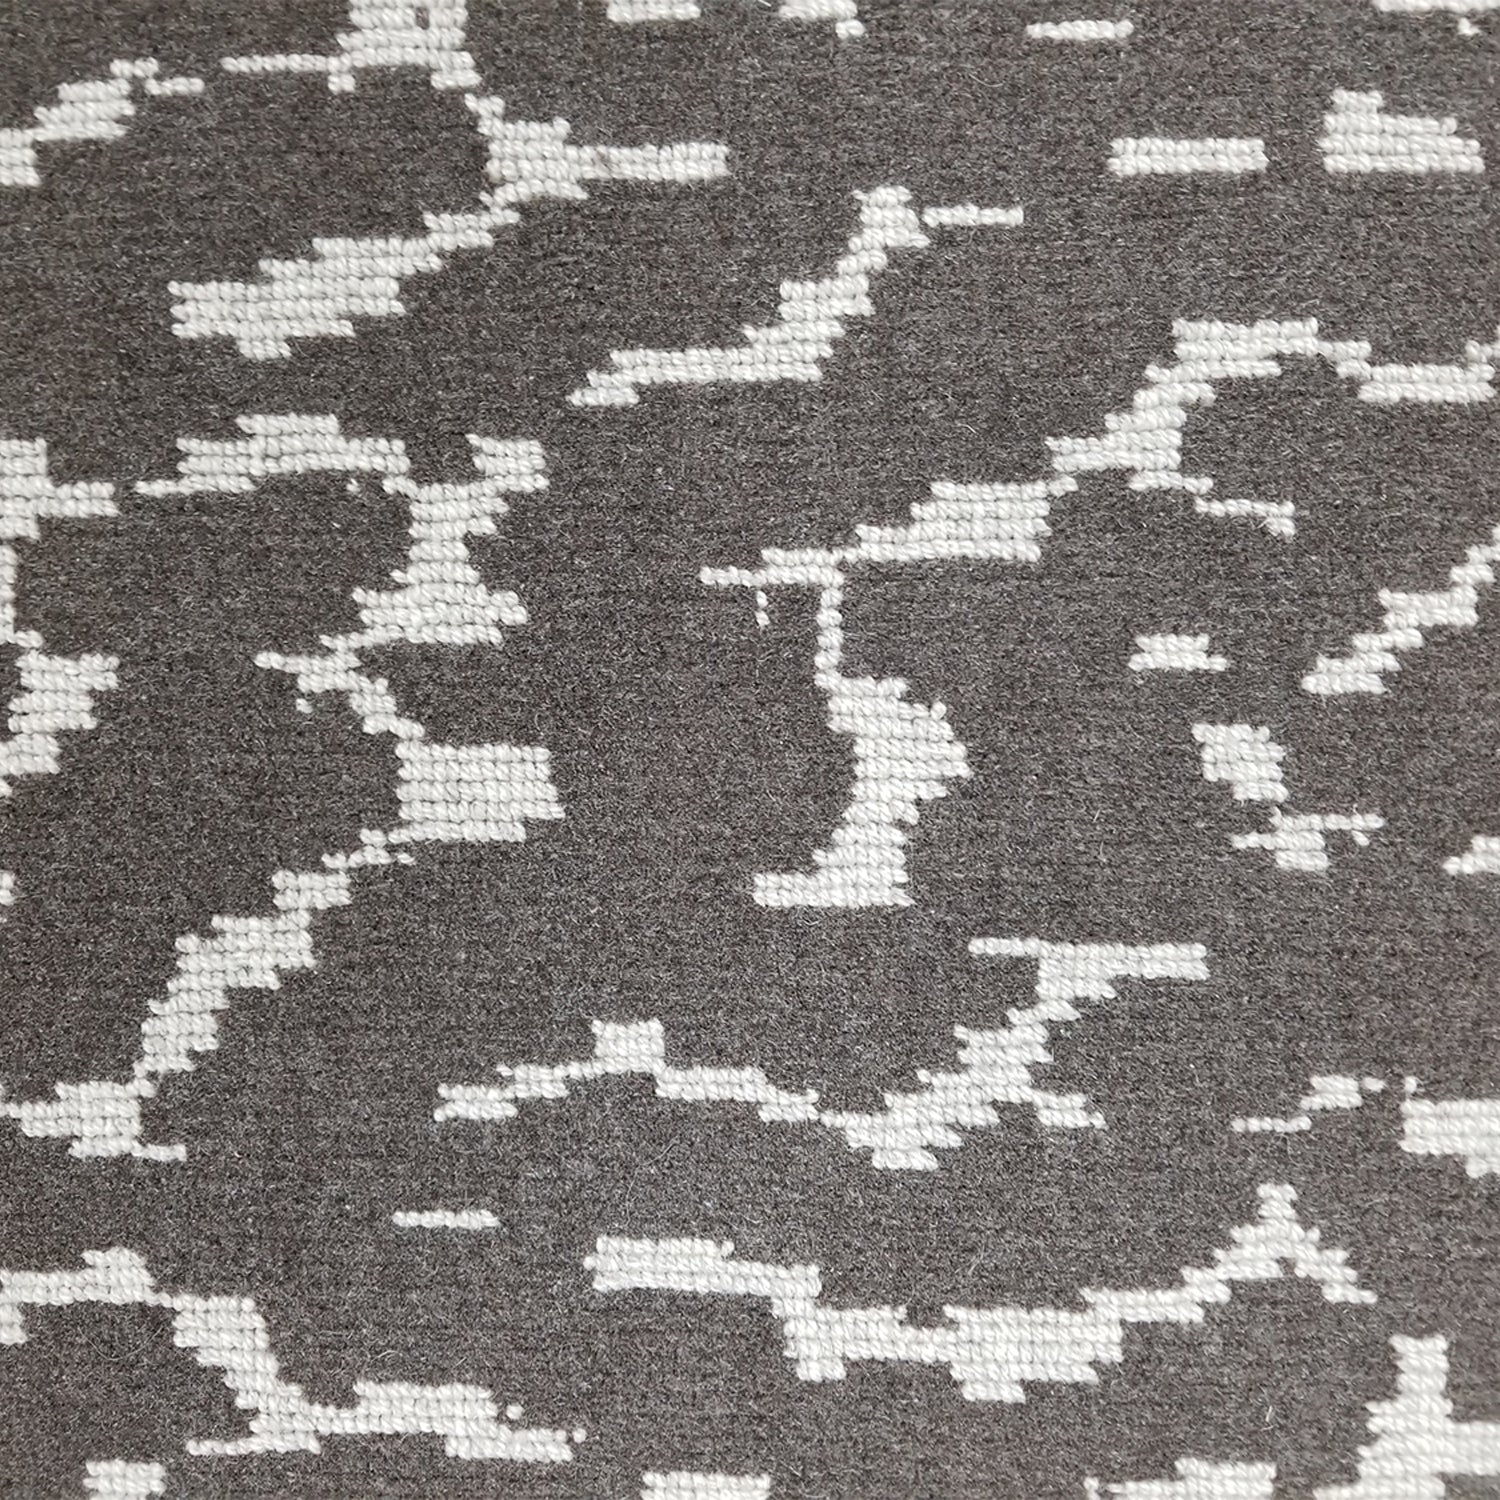 Wool broadloom carpet swatch in a woven cloud pattern in dark gray with light gray accents.